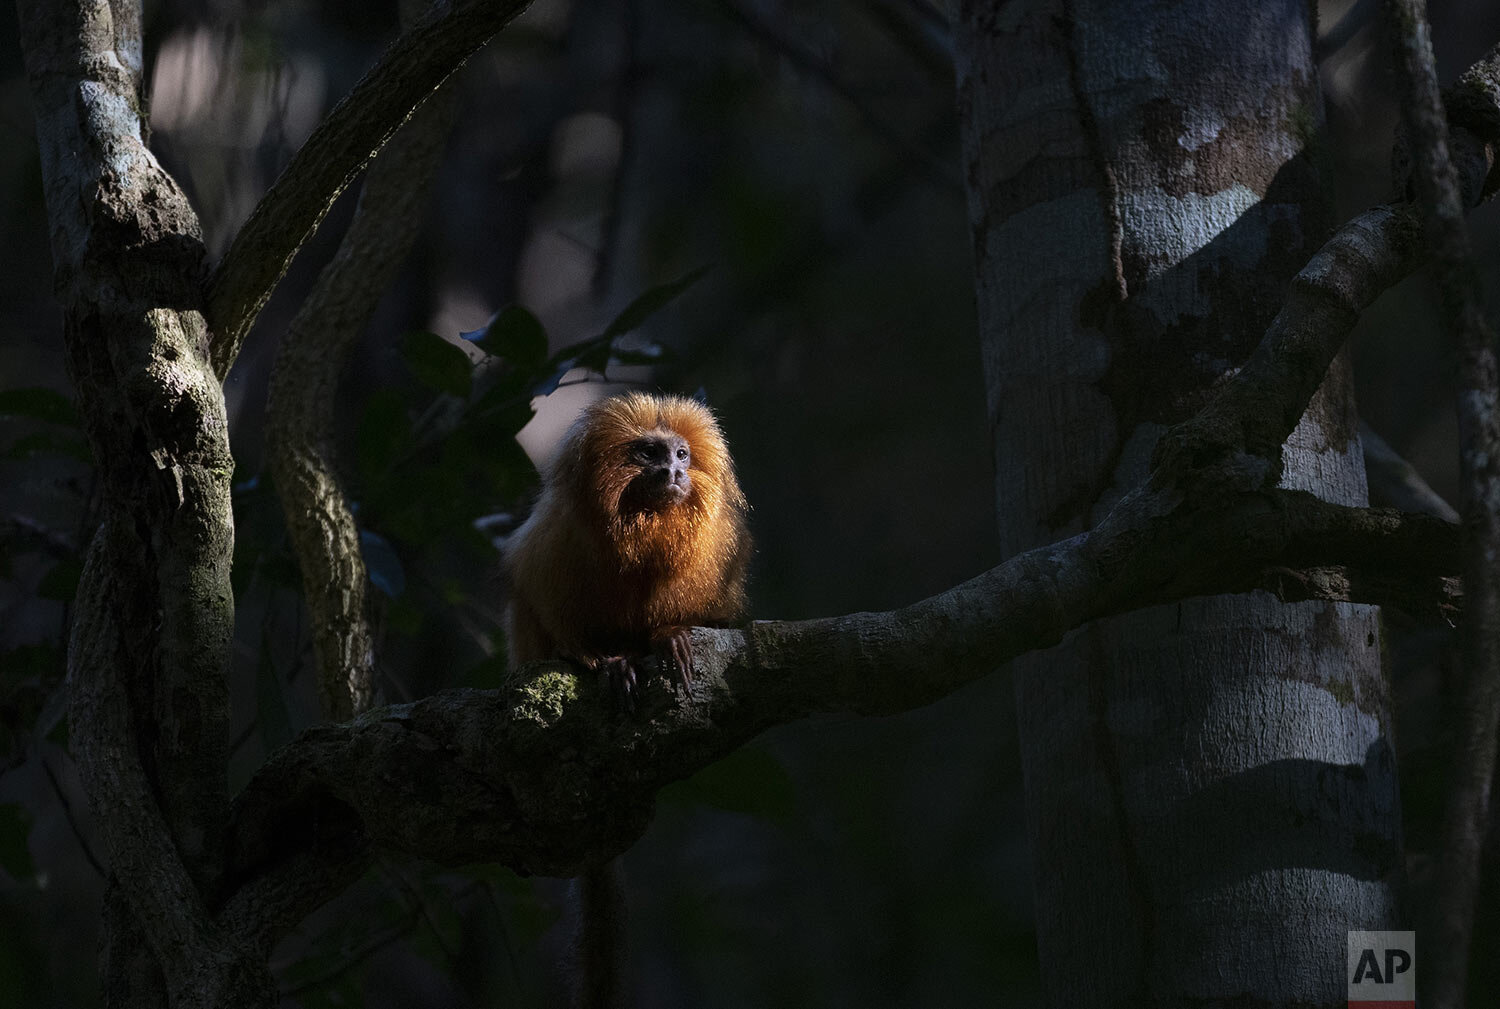  A Golden Lion Tamarin sits in the Atlantic Forest region of Silva Jardim in Rio de Janeiro state, Brazil, Aug. 6, 2020, where an eco-corridor will soon allow primates to safely cross an interstate highway. (AP Photo/Silvia Izquierdo) 